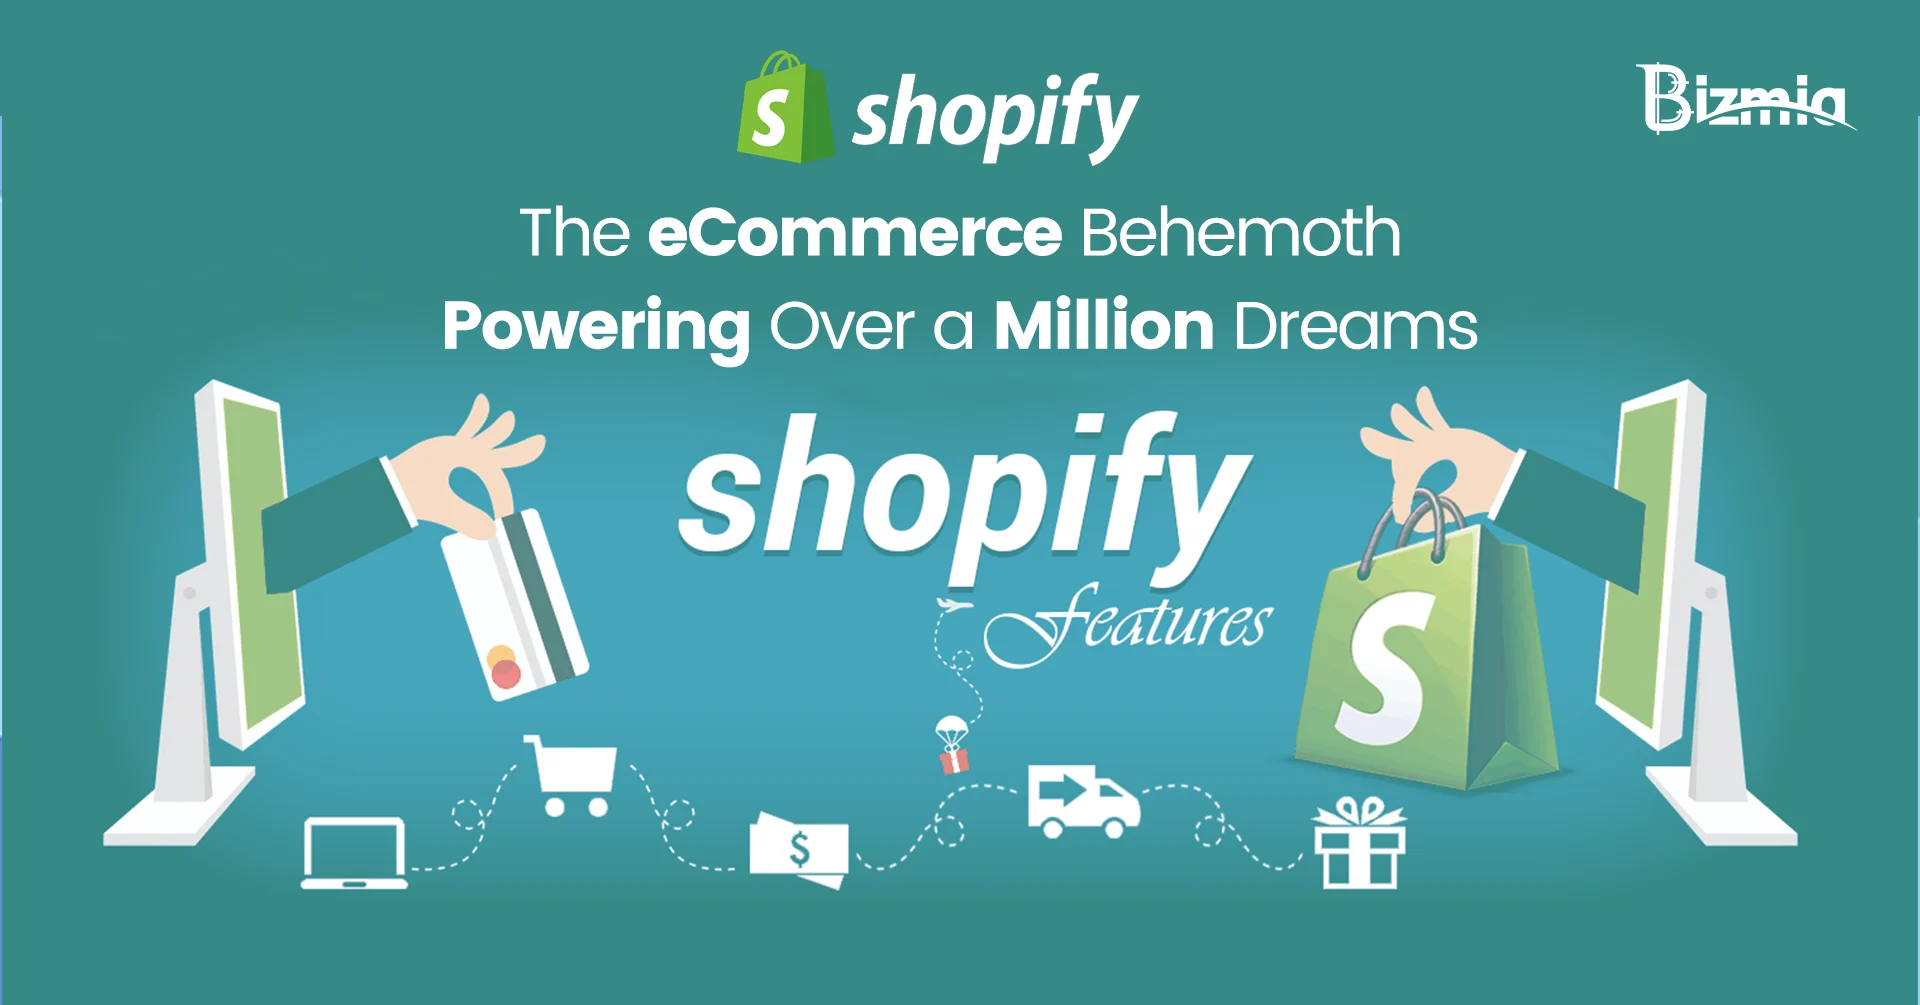 Shopify - The eCommerce behemoth powering over a million dreams